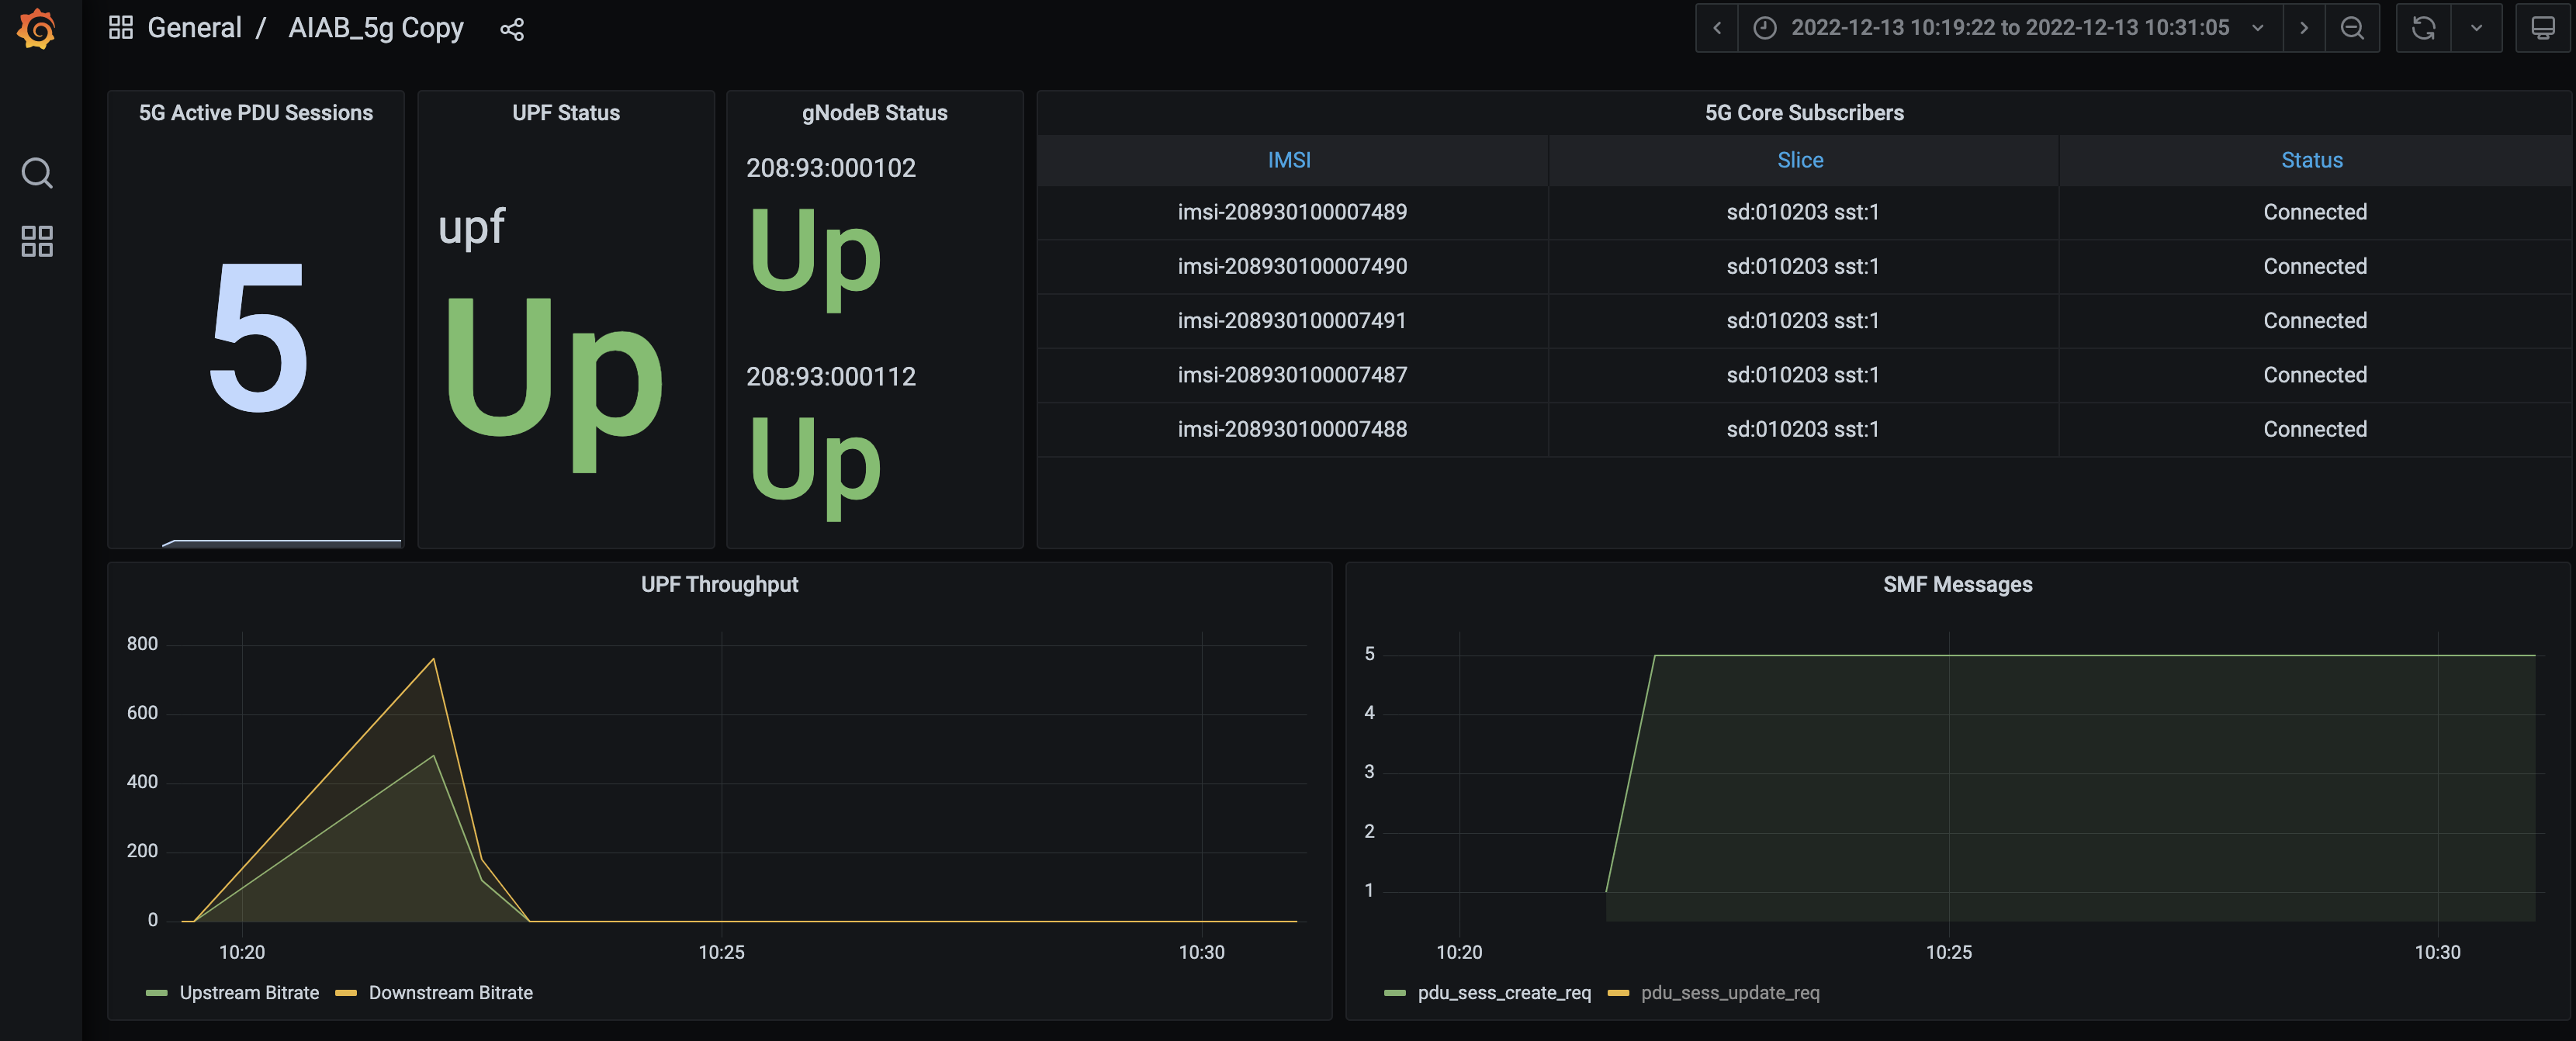 ../_images/5g-aiab-grafana-dashboard.png